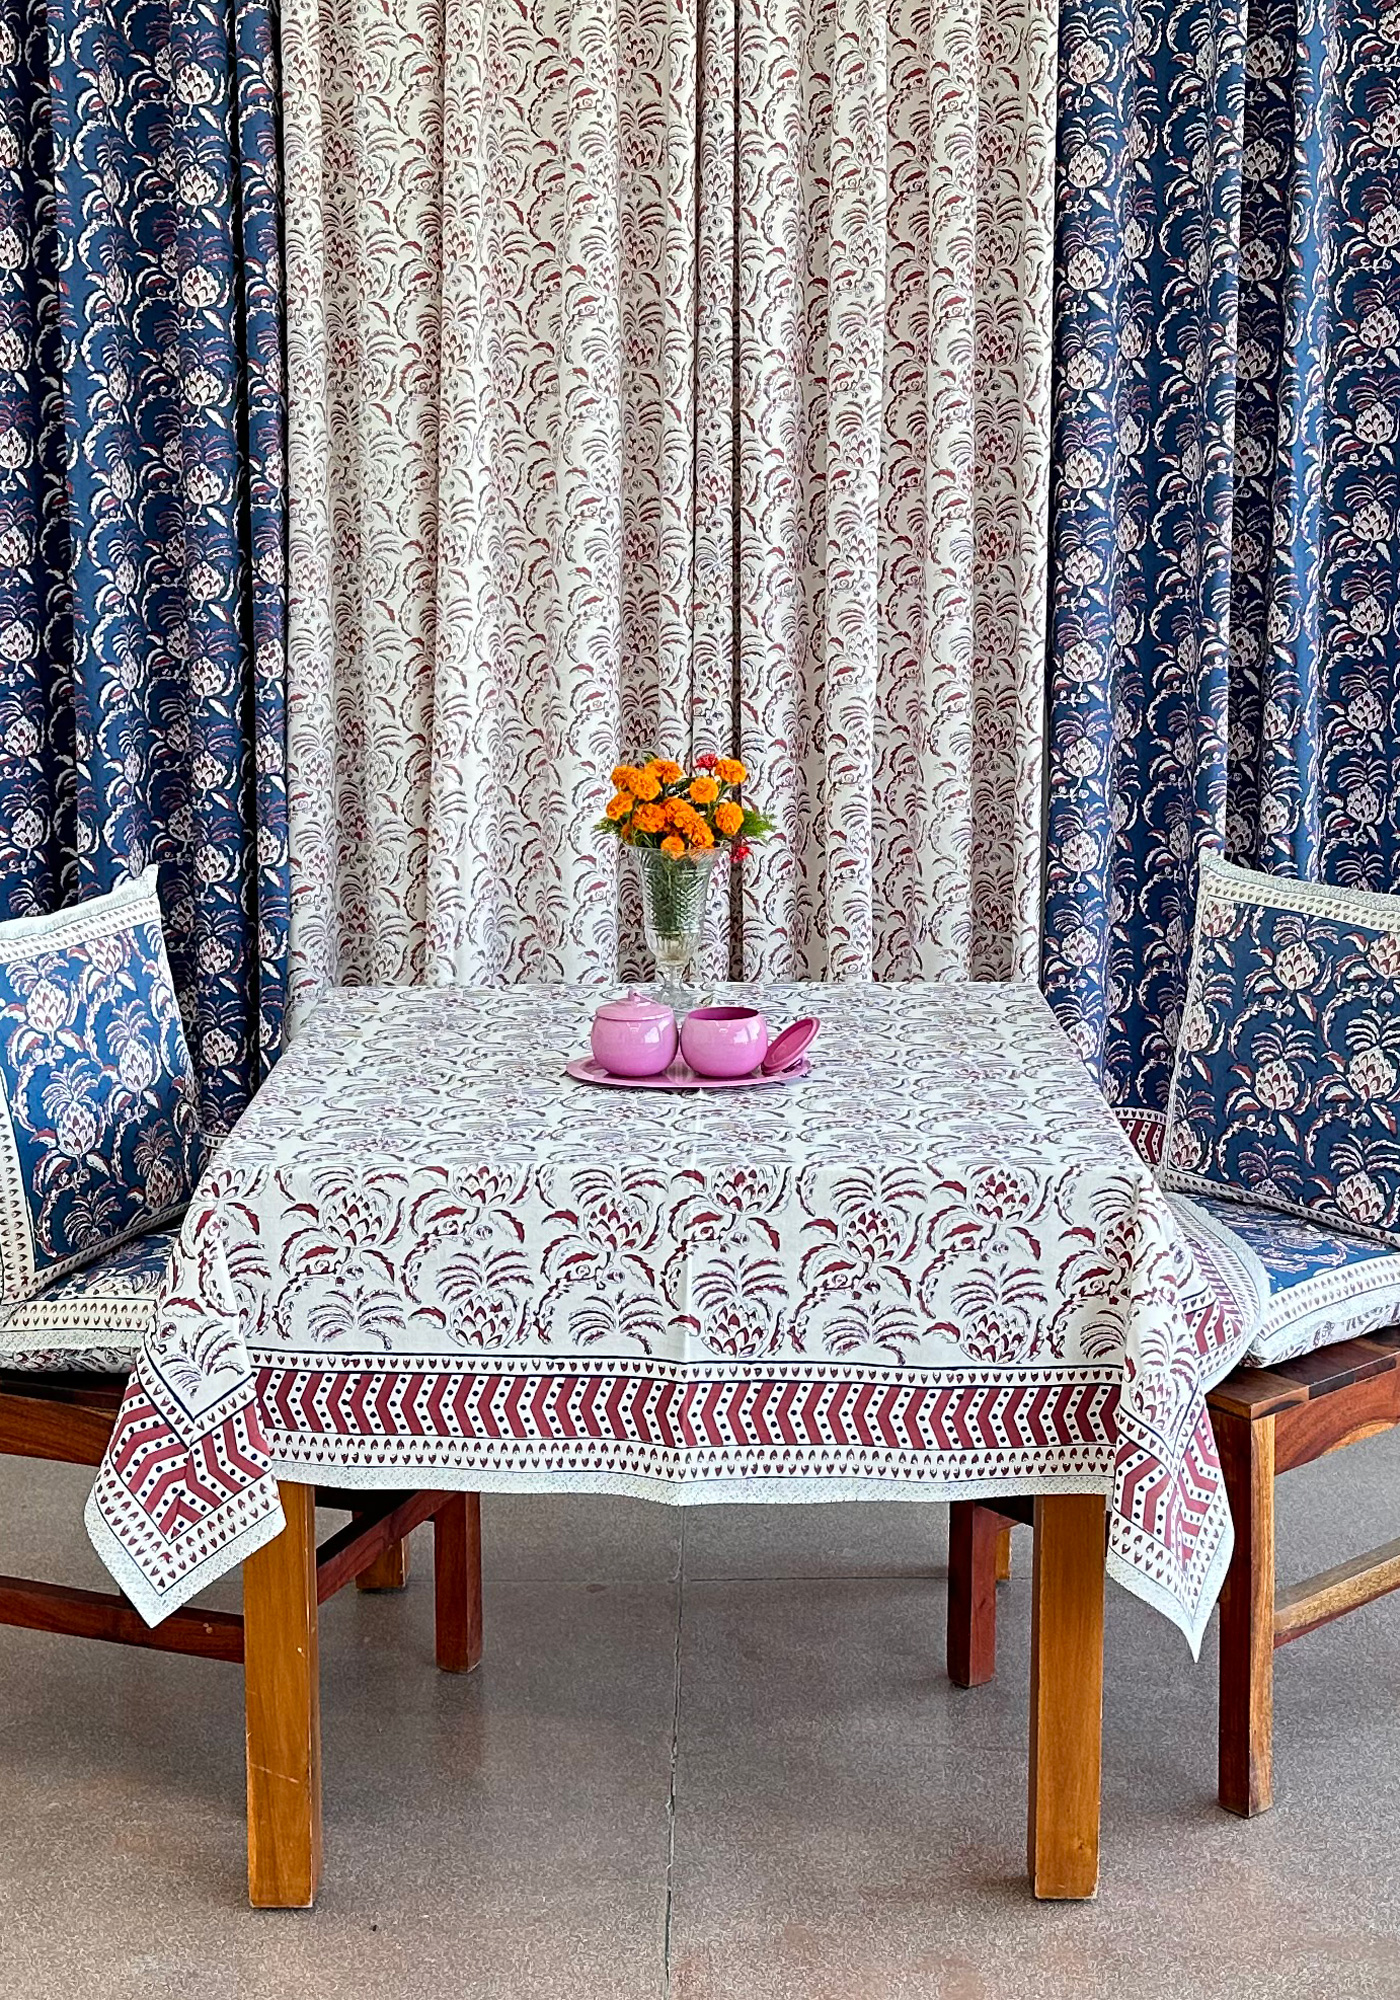 TABLE CLOTH SQUARE -150X150 CMS